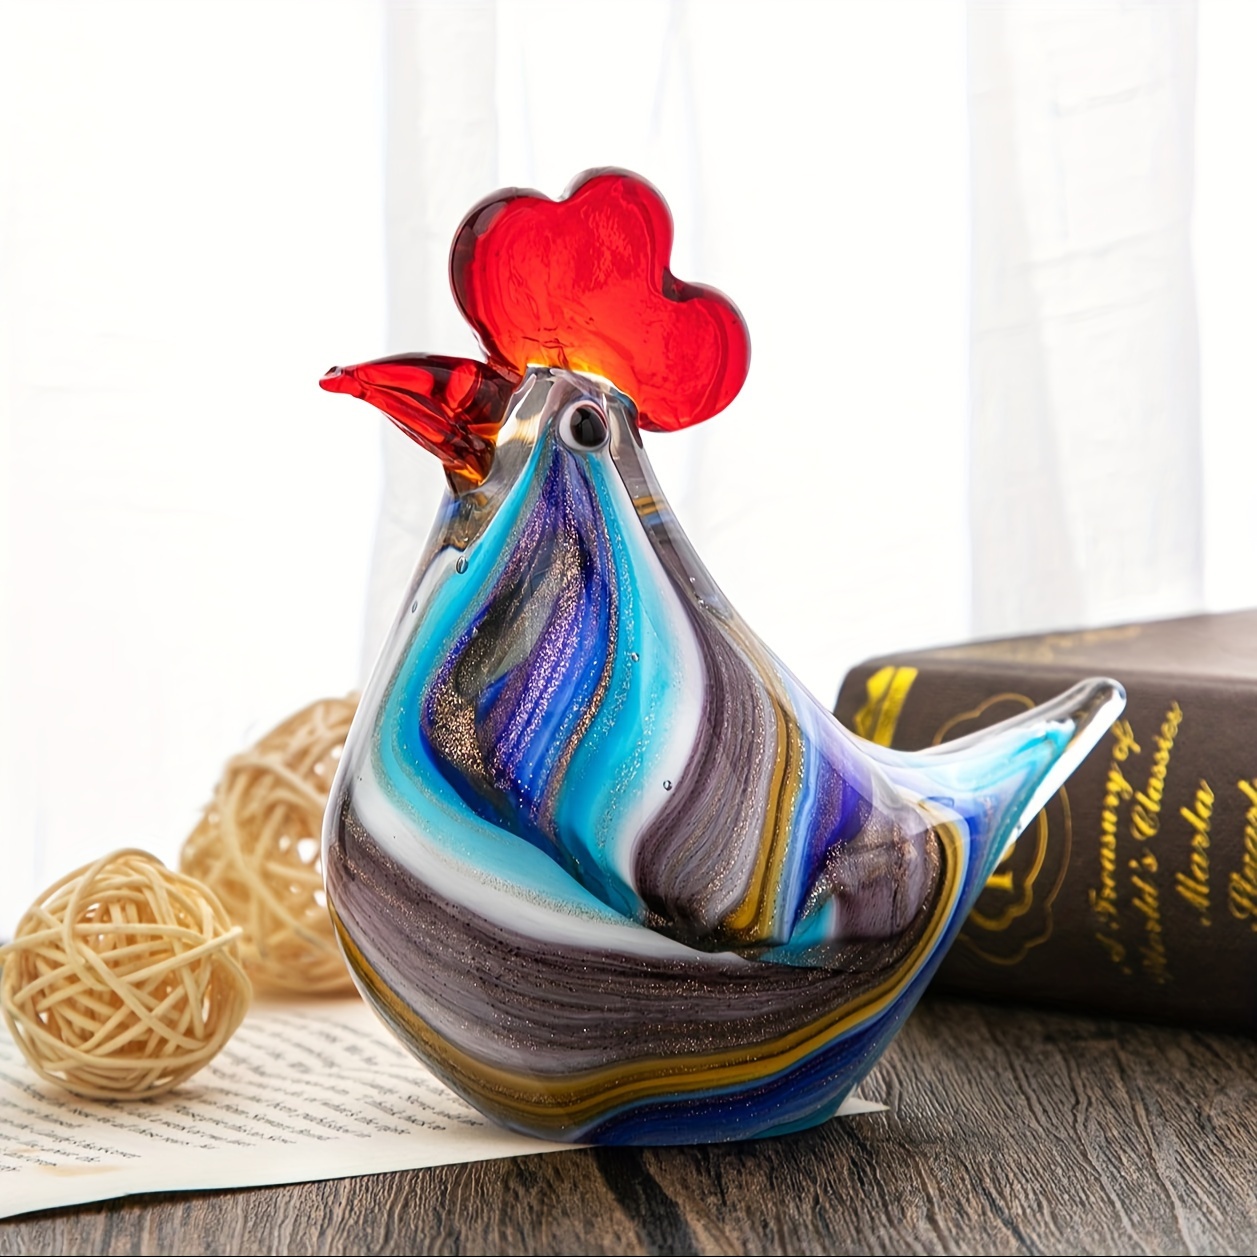 

Hand-blown Glass Rooster Figurine - Colorful, Gilded Design With Symbolic Love Theme - Perfect For Home & Office Decor, Ideal Valentine's Day Or Holiday Gift